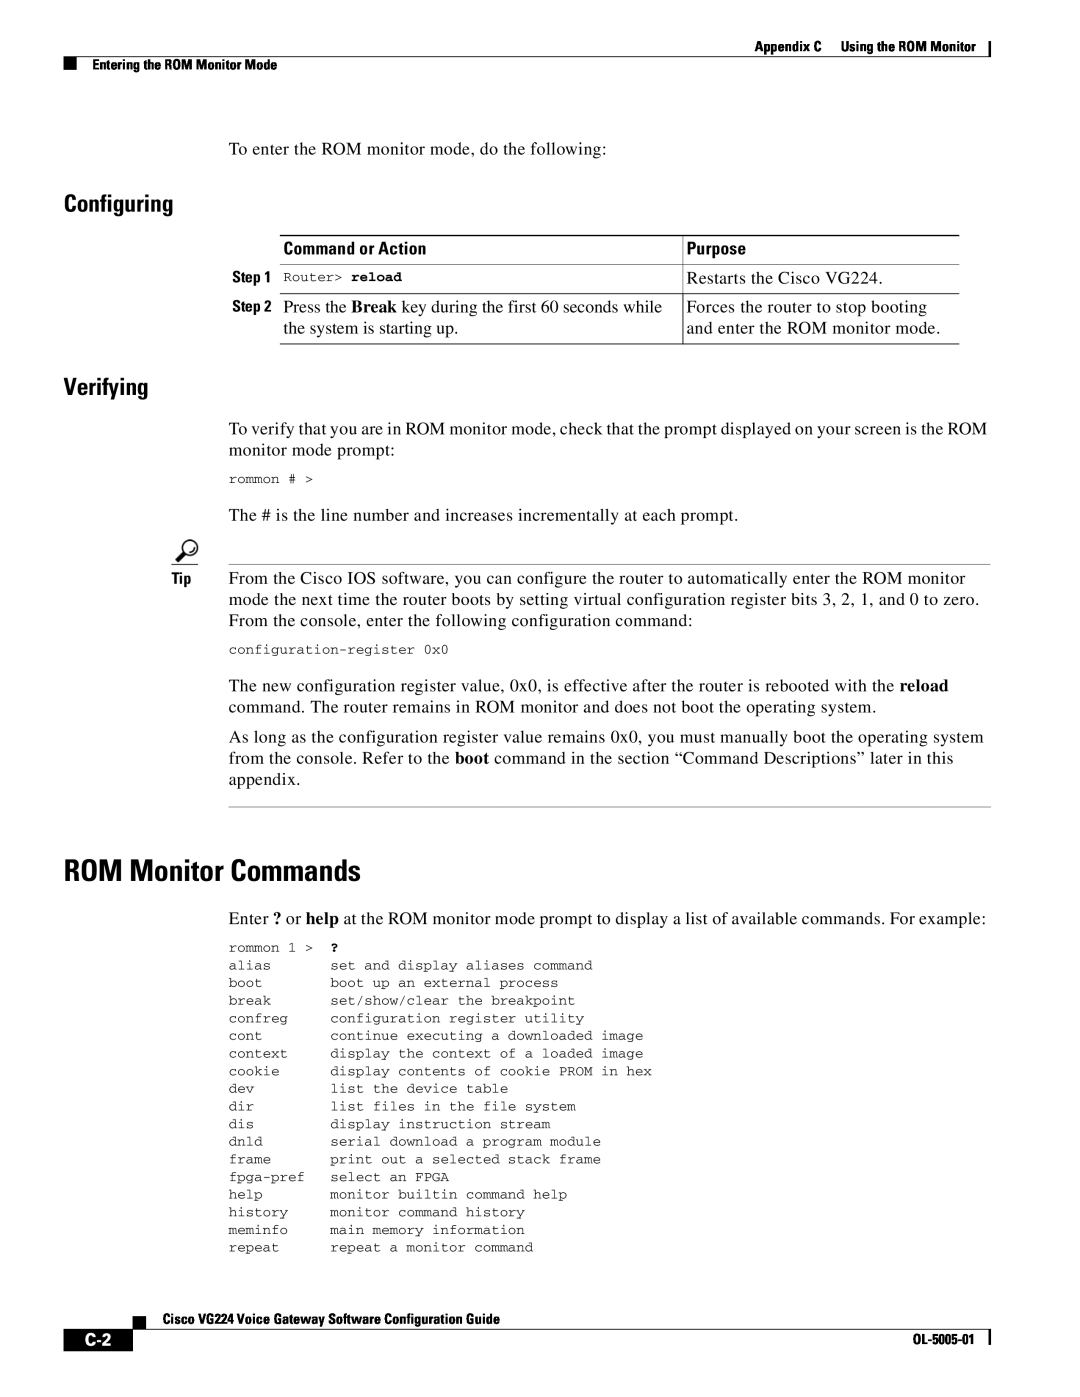 Cisco Systems VG224 manual ROM Monitor Commands, Configuring, Verifying, Command or Action, Purpose 